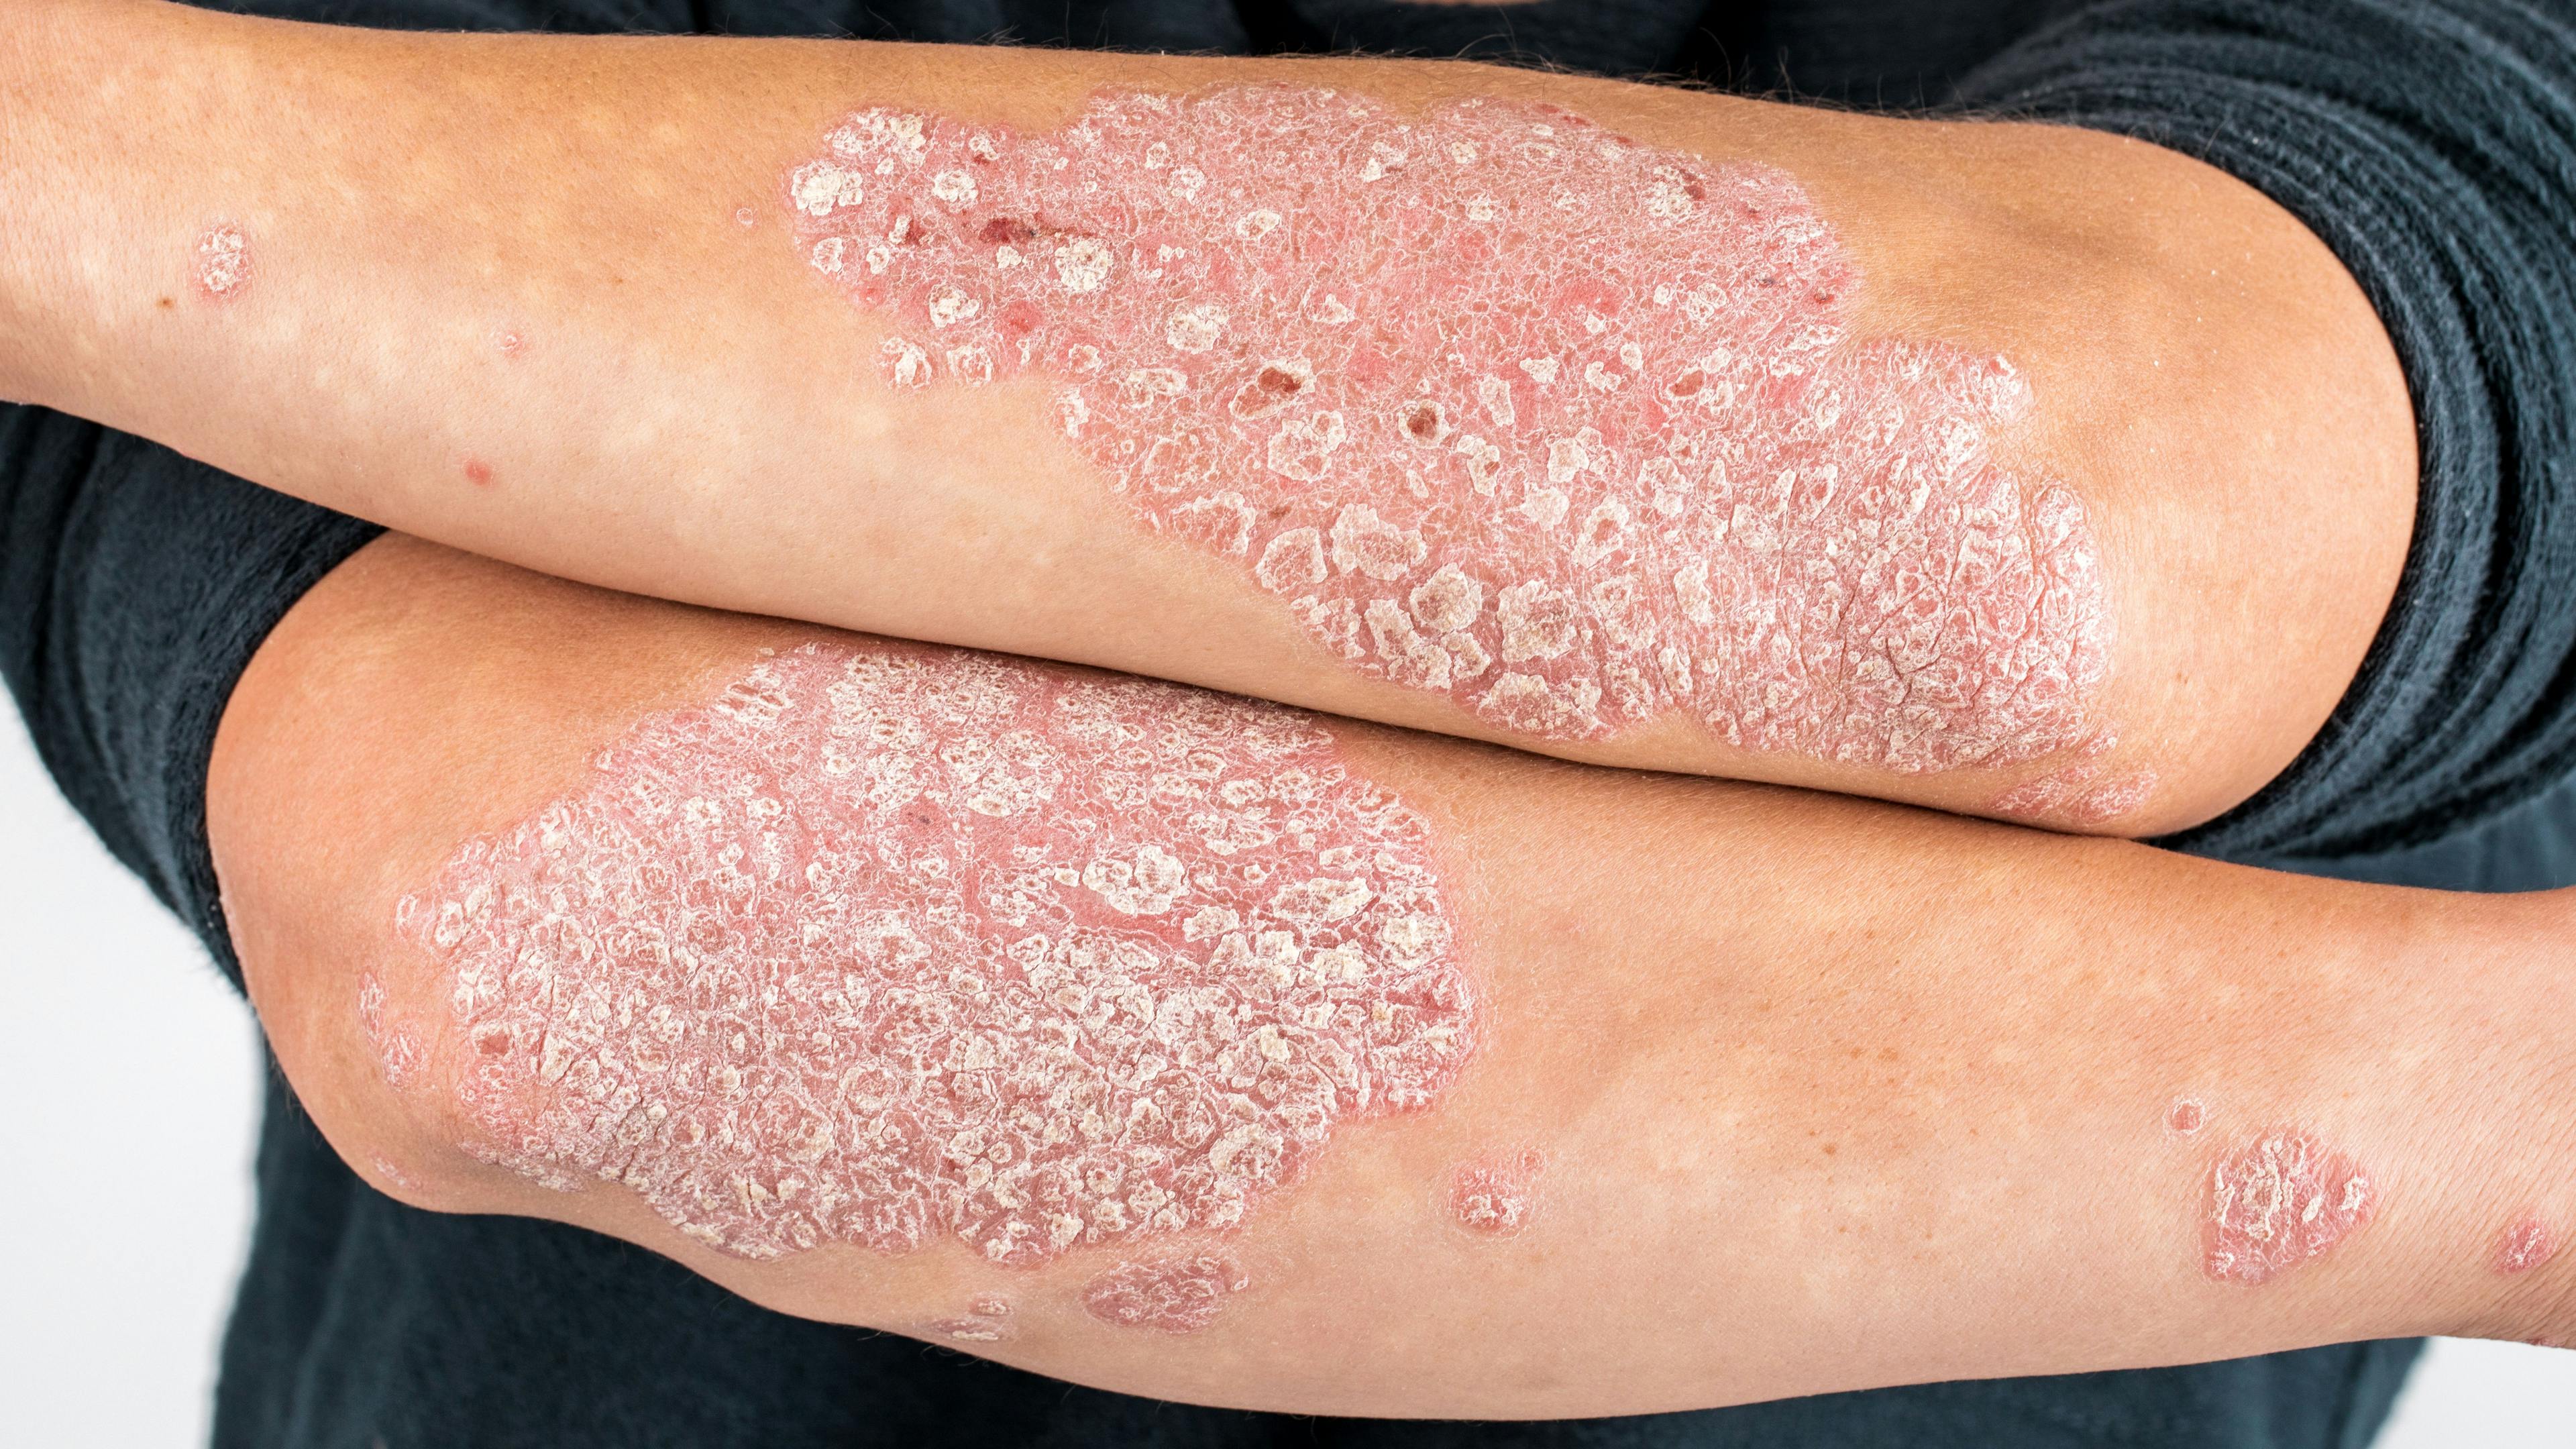 Study Finds Long-Term Safety and Efficacy for Roflumilast Cream for Chronic Plaque Psoriasis